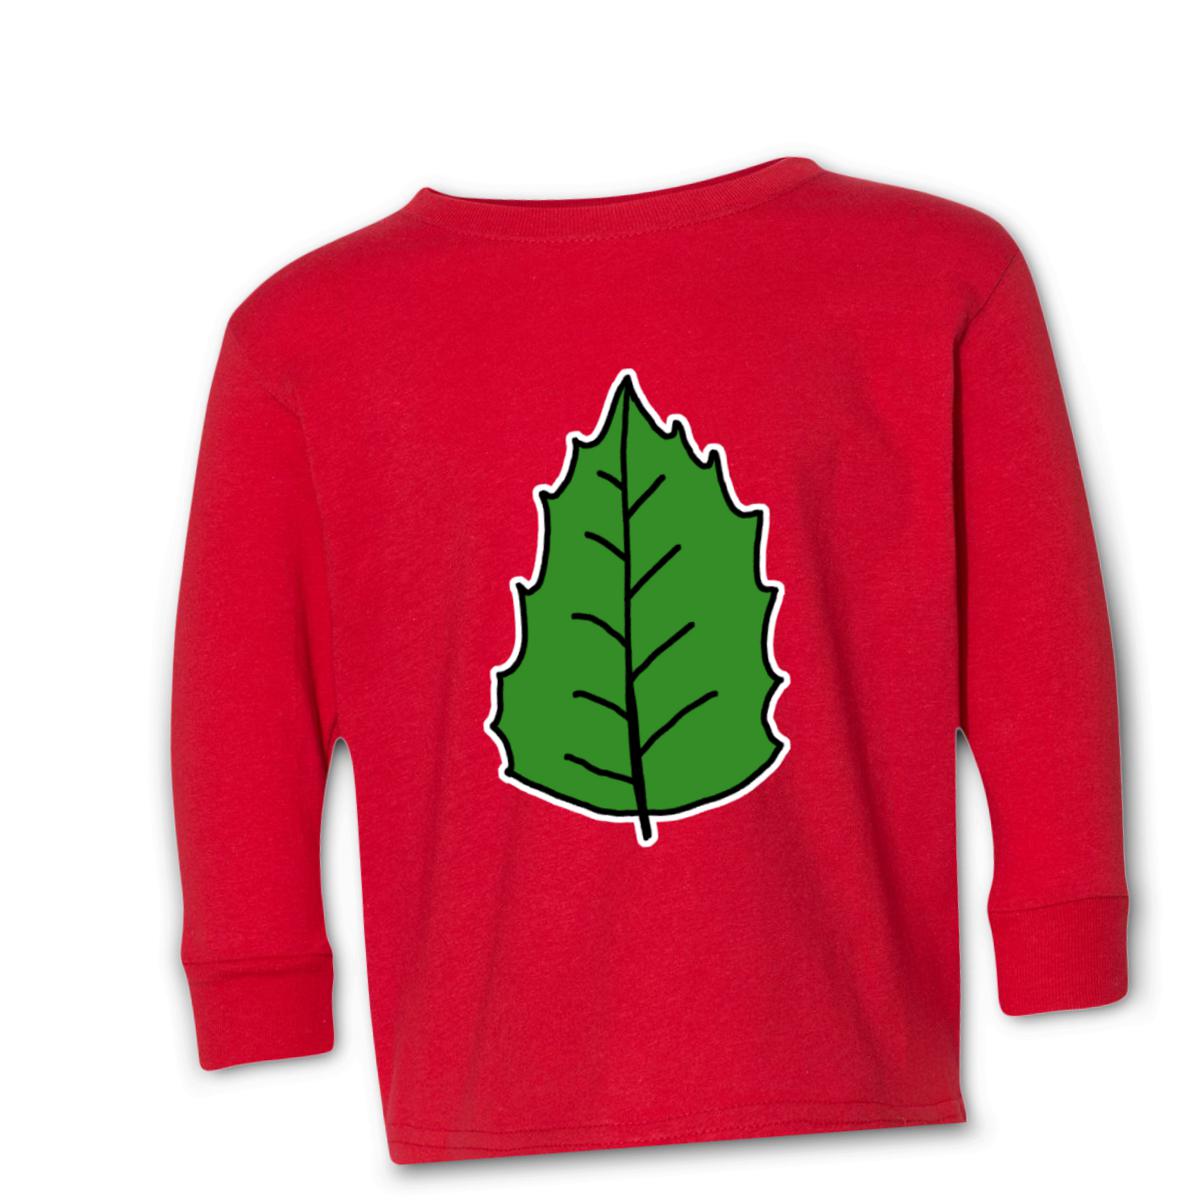 Holly Leaf Kid's Long Sleeve Tee Small red